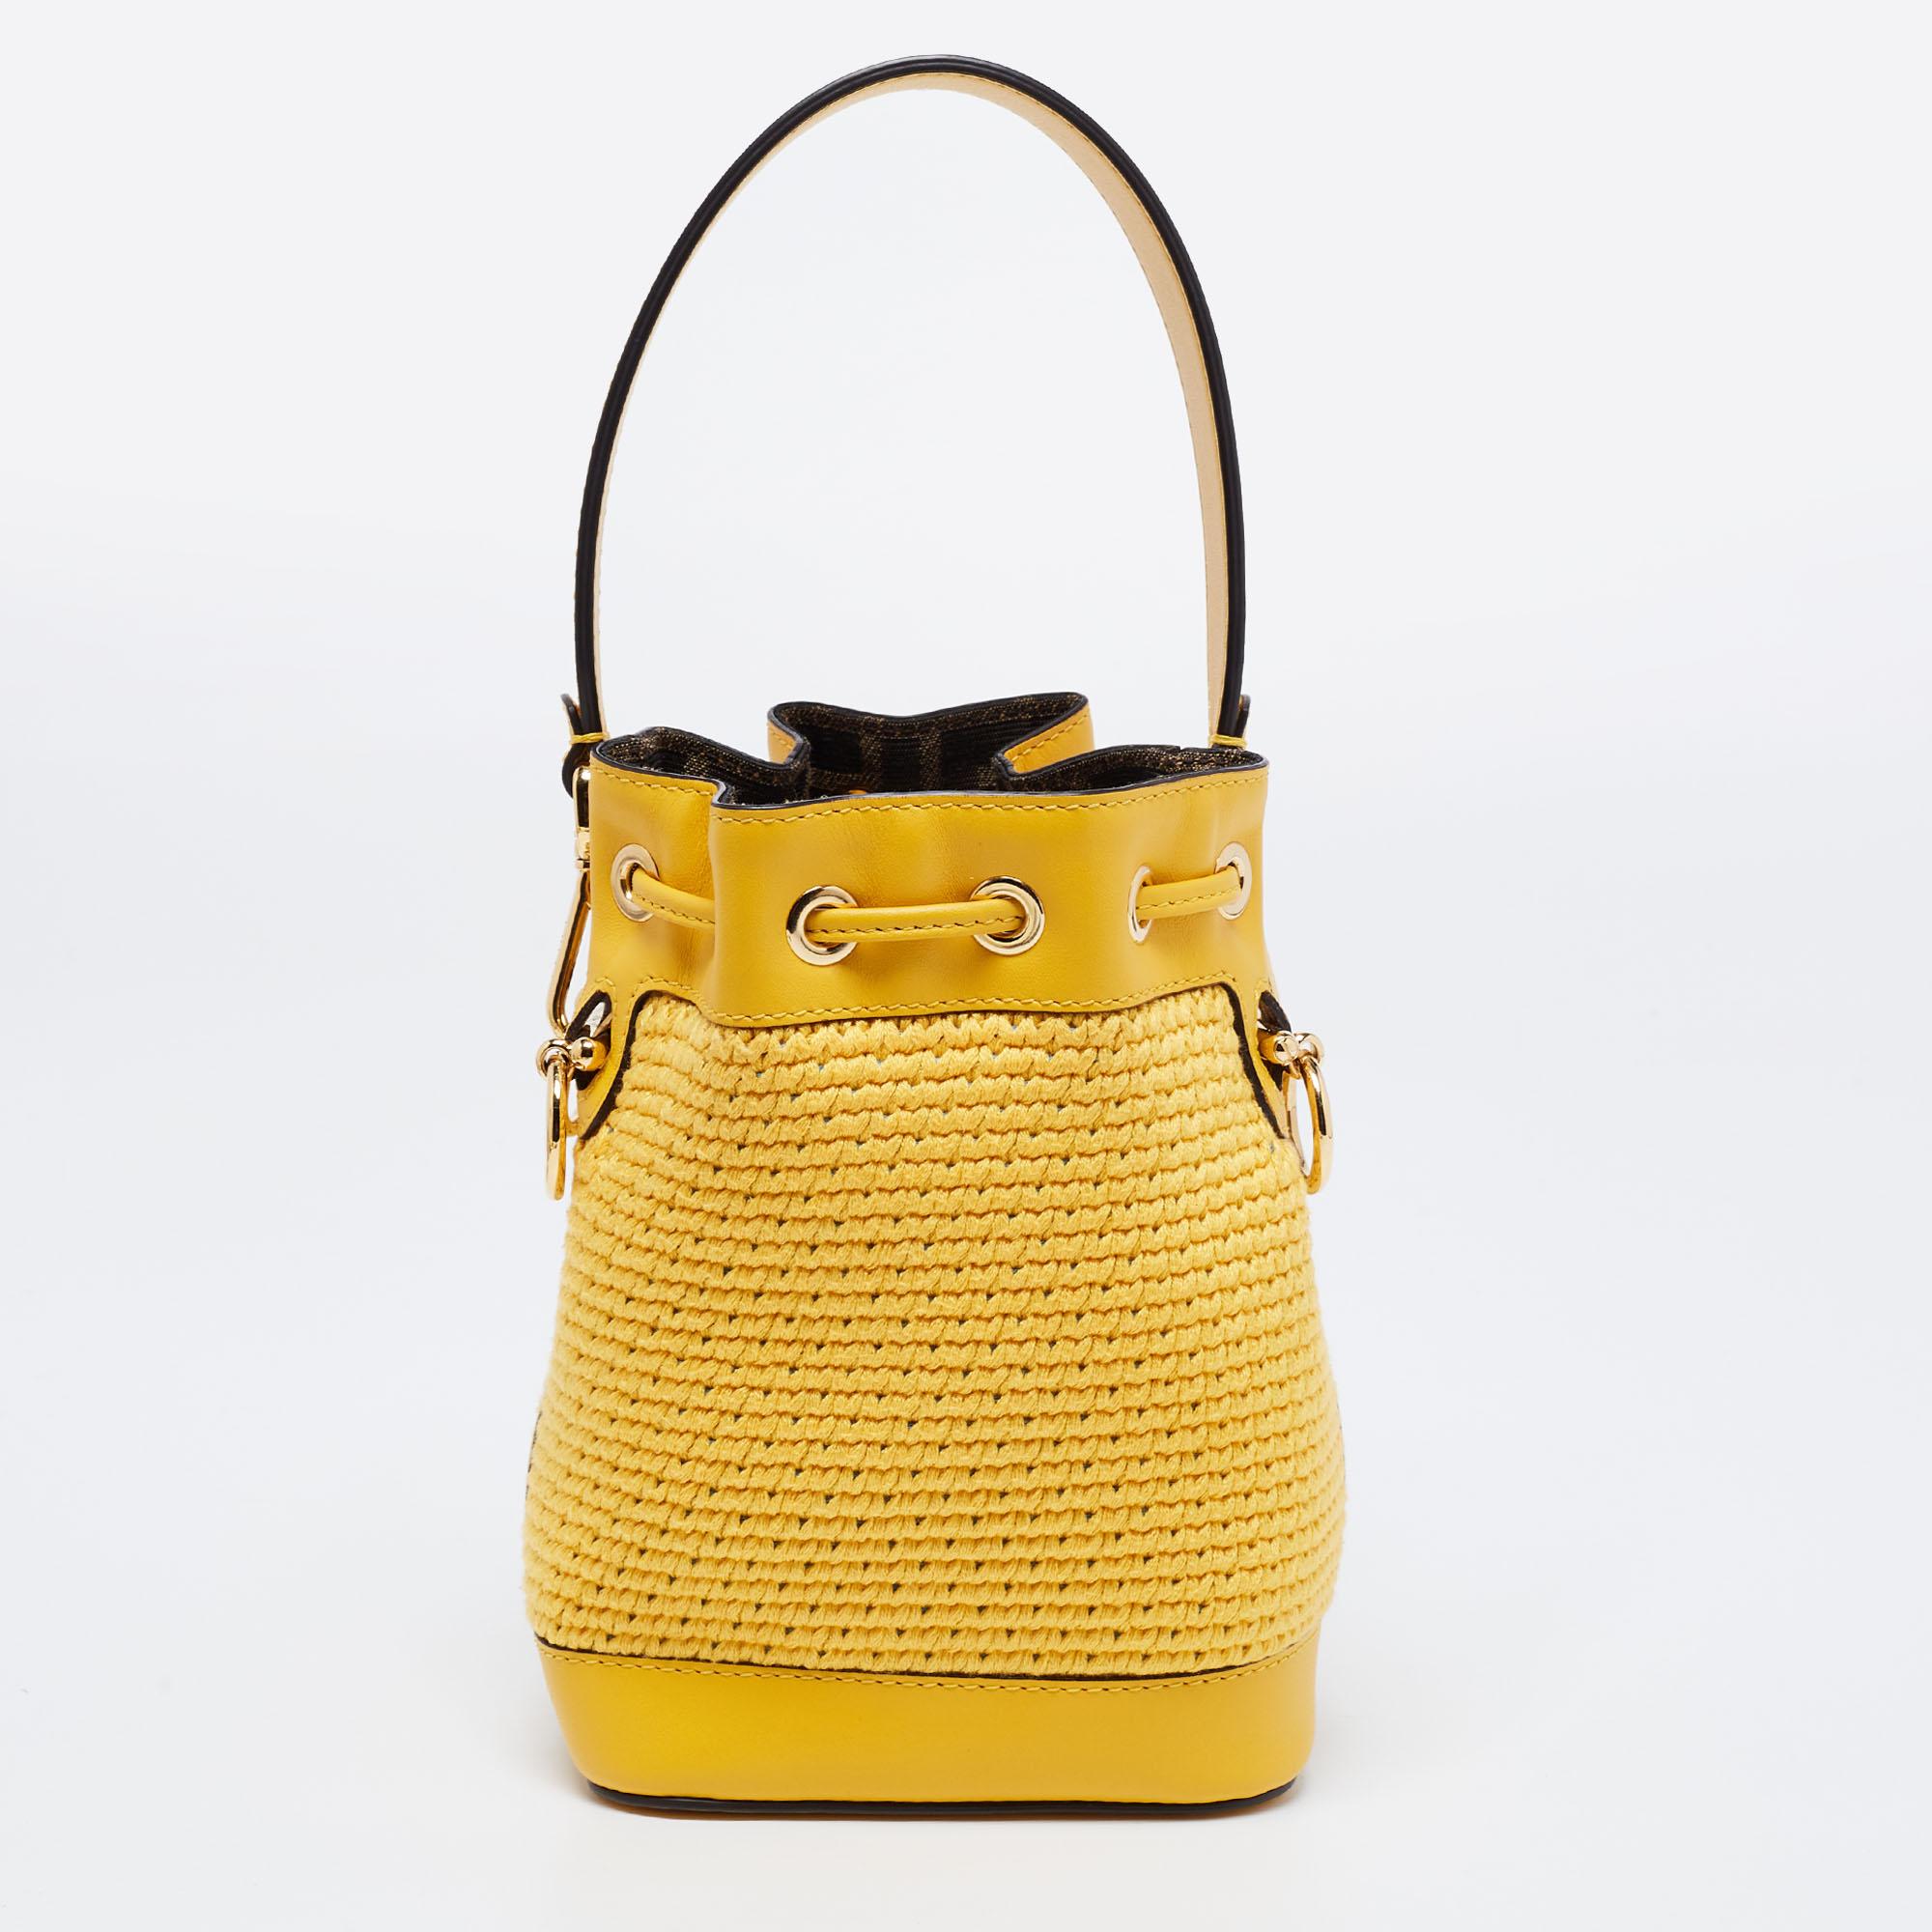 This wonderful Fendi design is made from crochet, leather, and gold-tone hardware. The bag has a bucket shape with a drawstring closure that secures the well-sized interior. Complete with a top handle and a shoulder strap, it is an apt accessory to